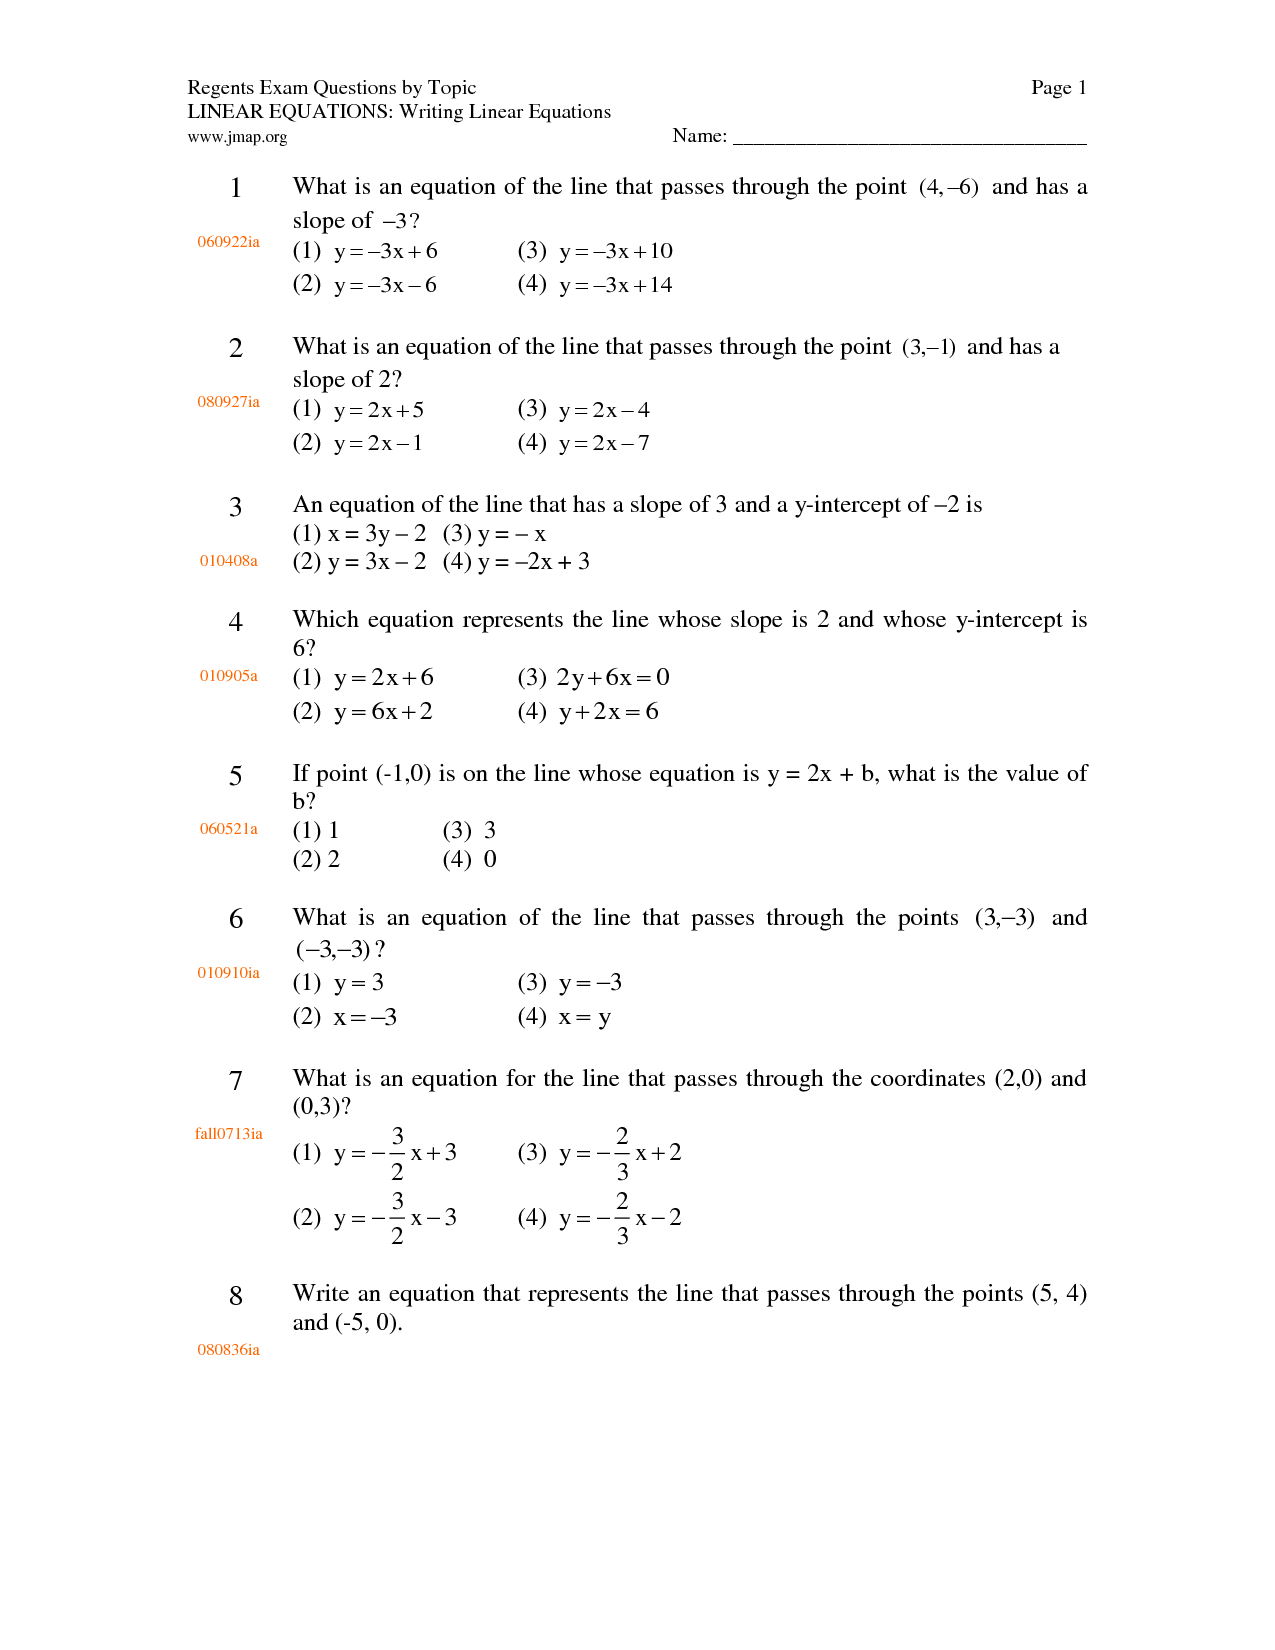 Writing Linear Equations Worksheets Image